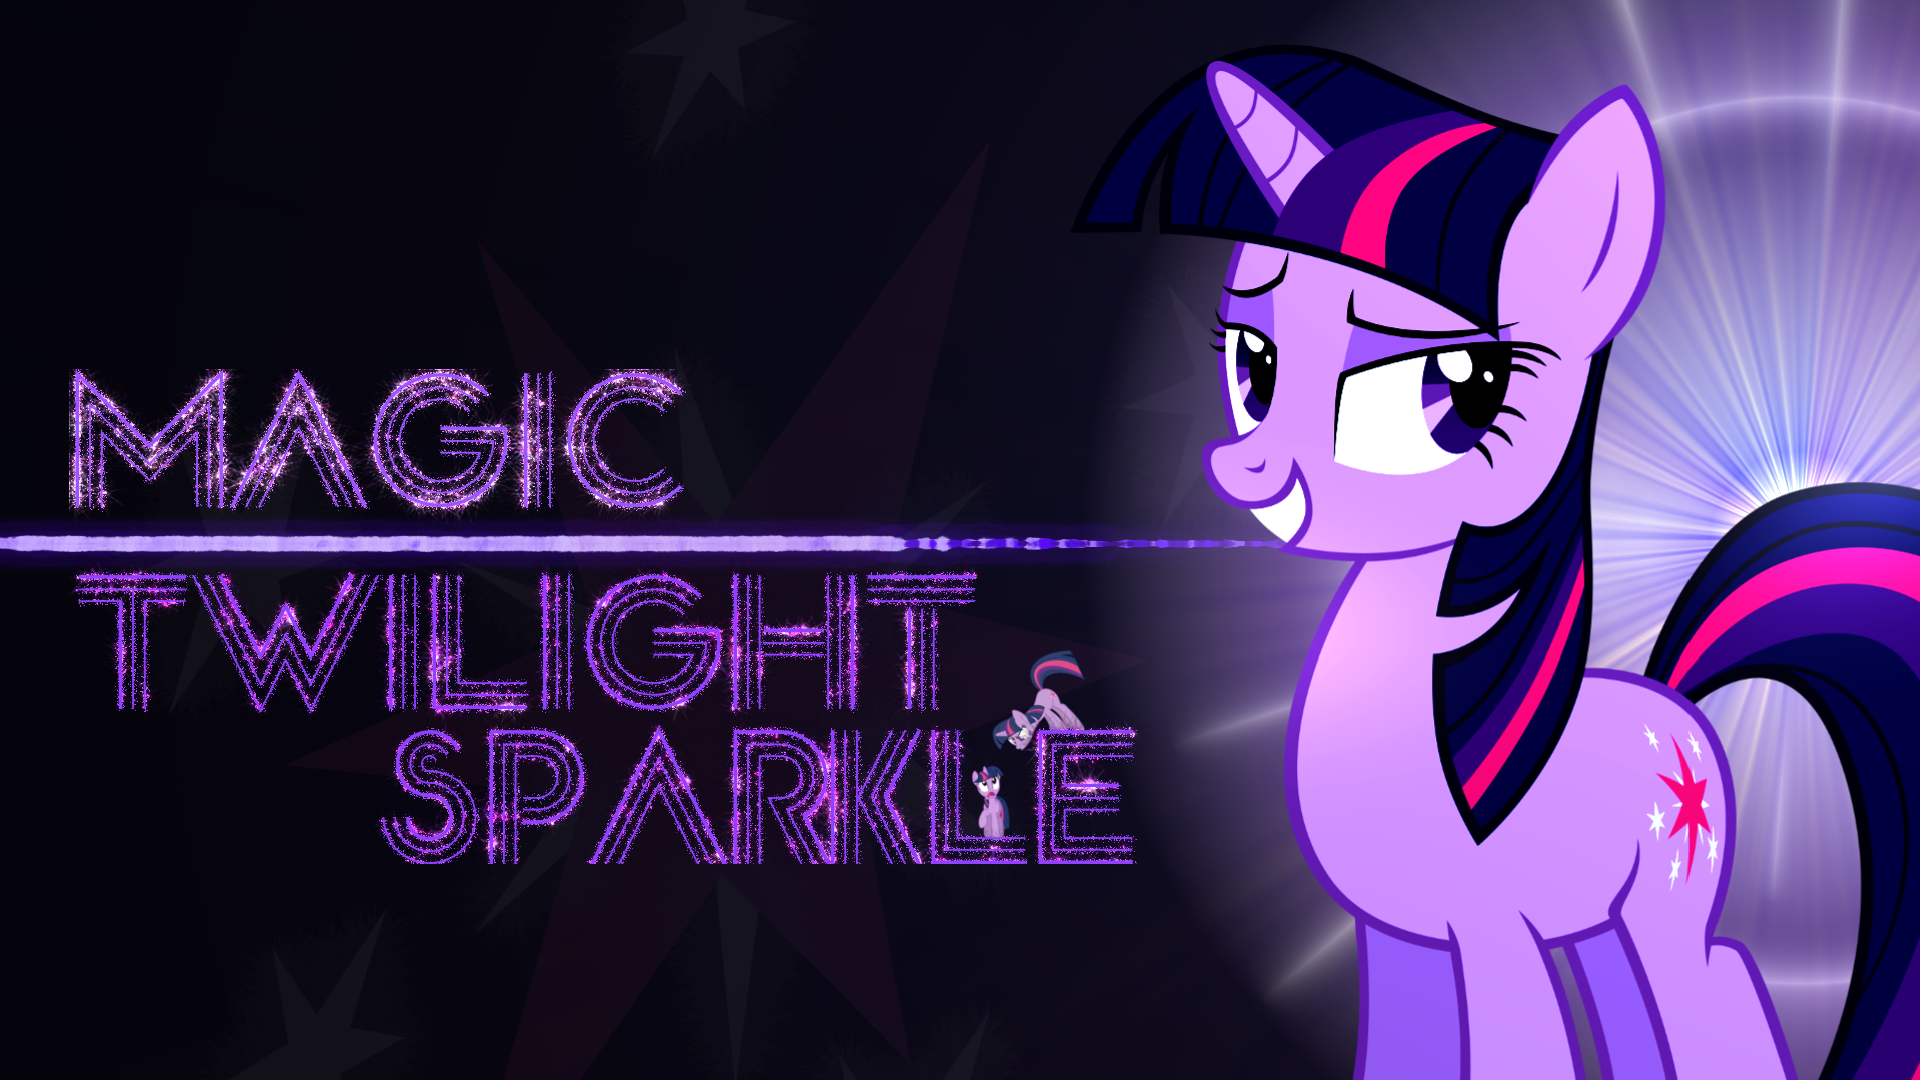 Shiny-shiny pretty lights wallpaper pack. by BlackGryph0n, Clueless313, datNaro, MaximillianVeers and stricer555